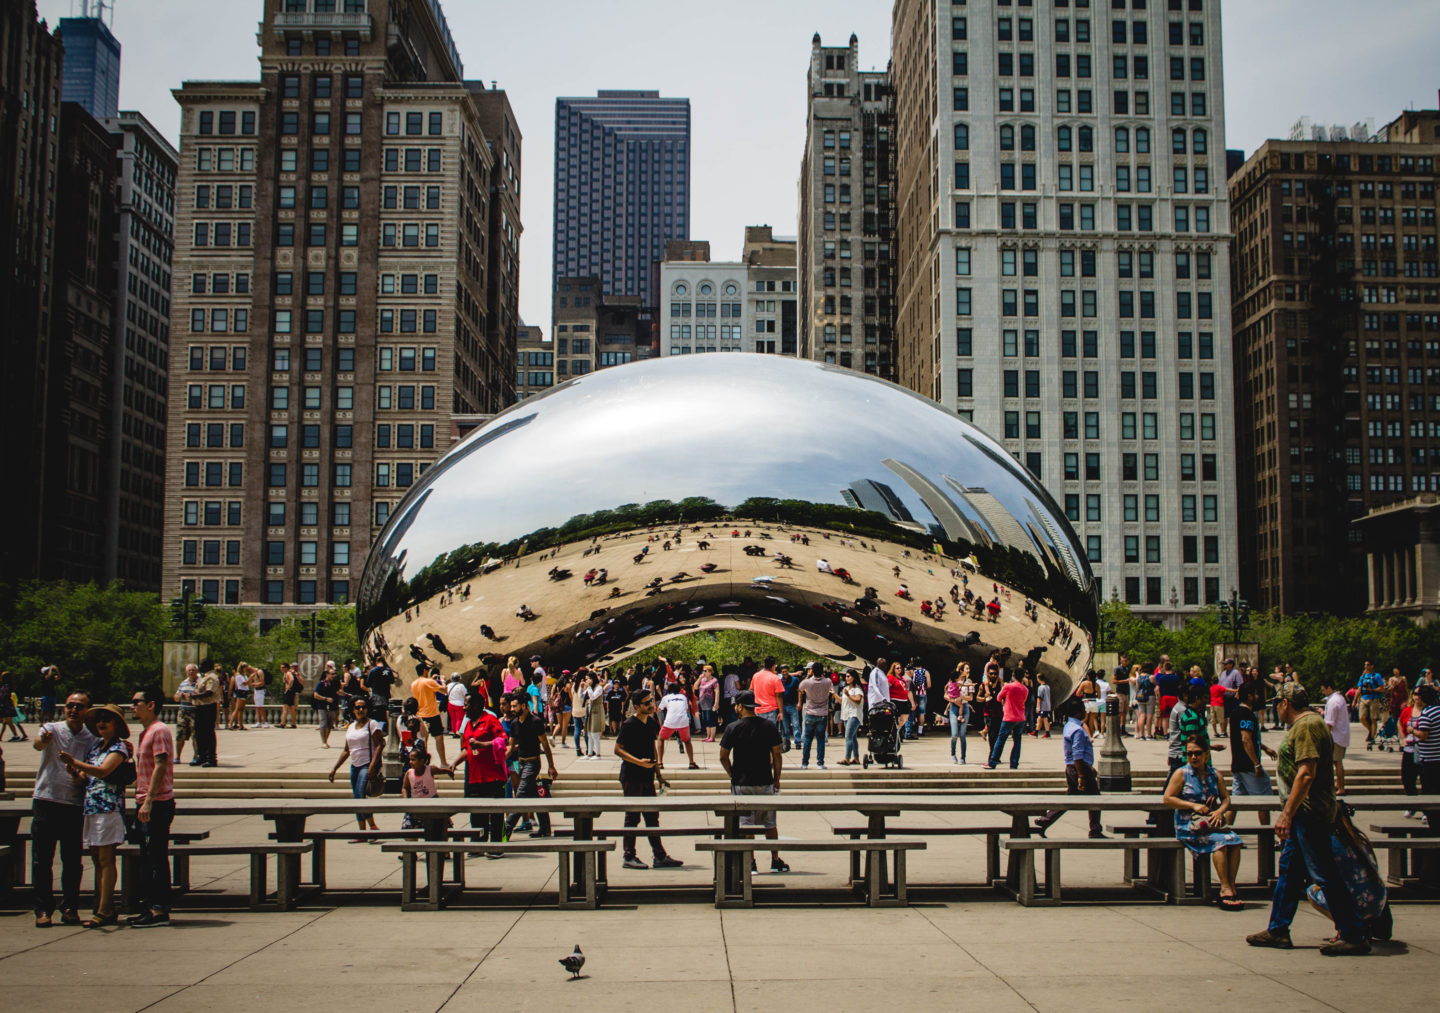 Notes from Chicago: 3 Takeaways from the Windy City (part 2)